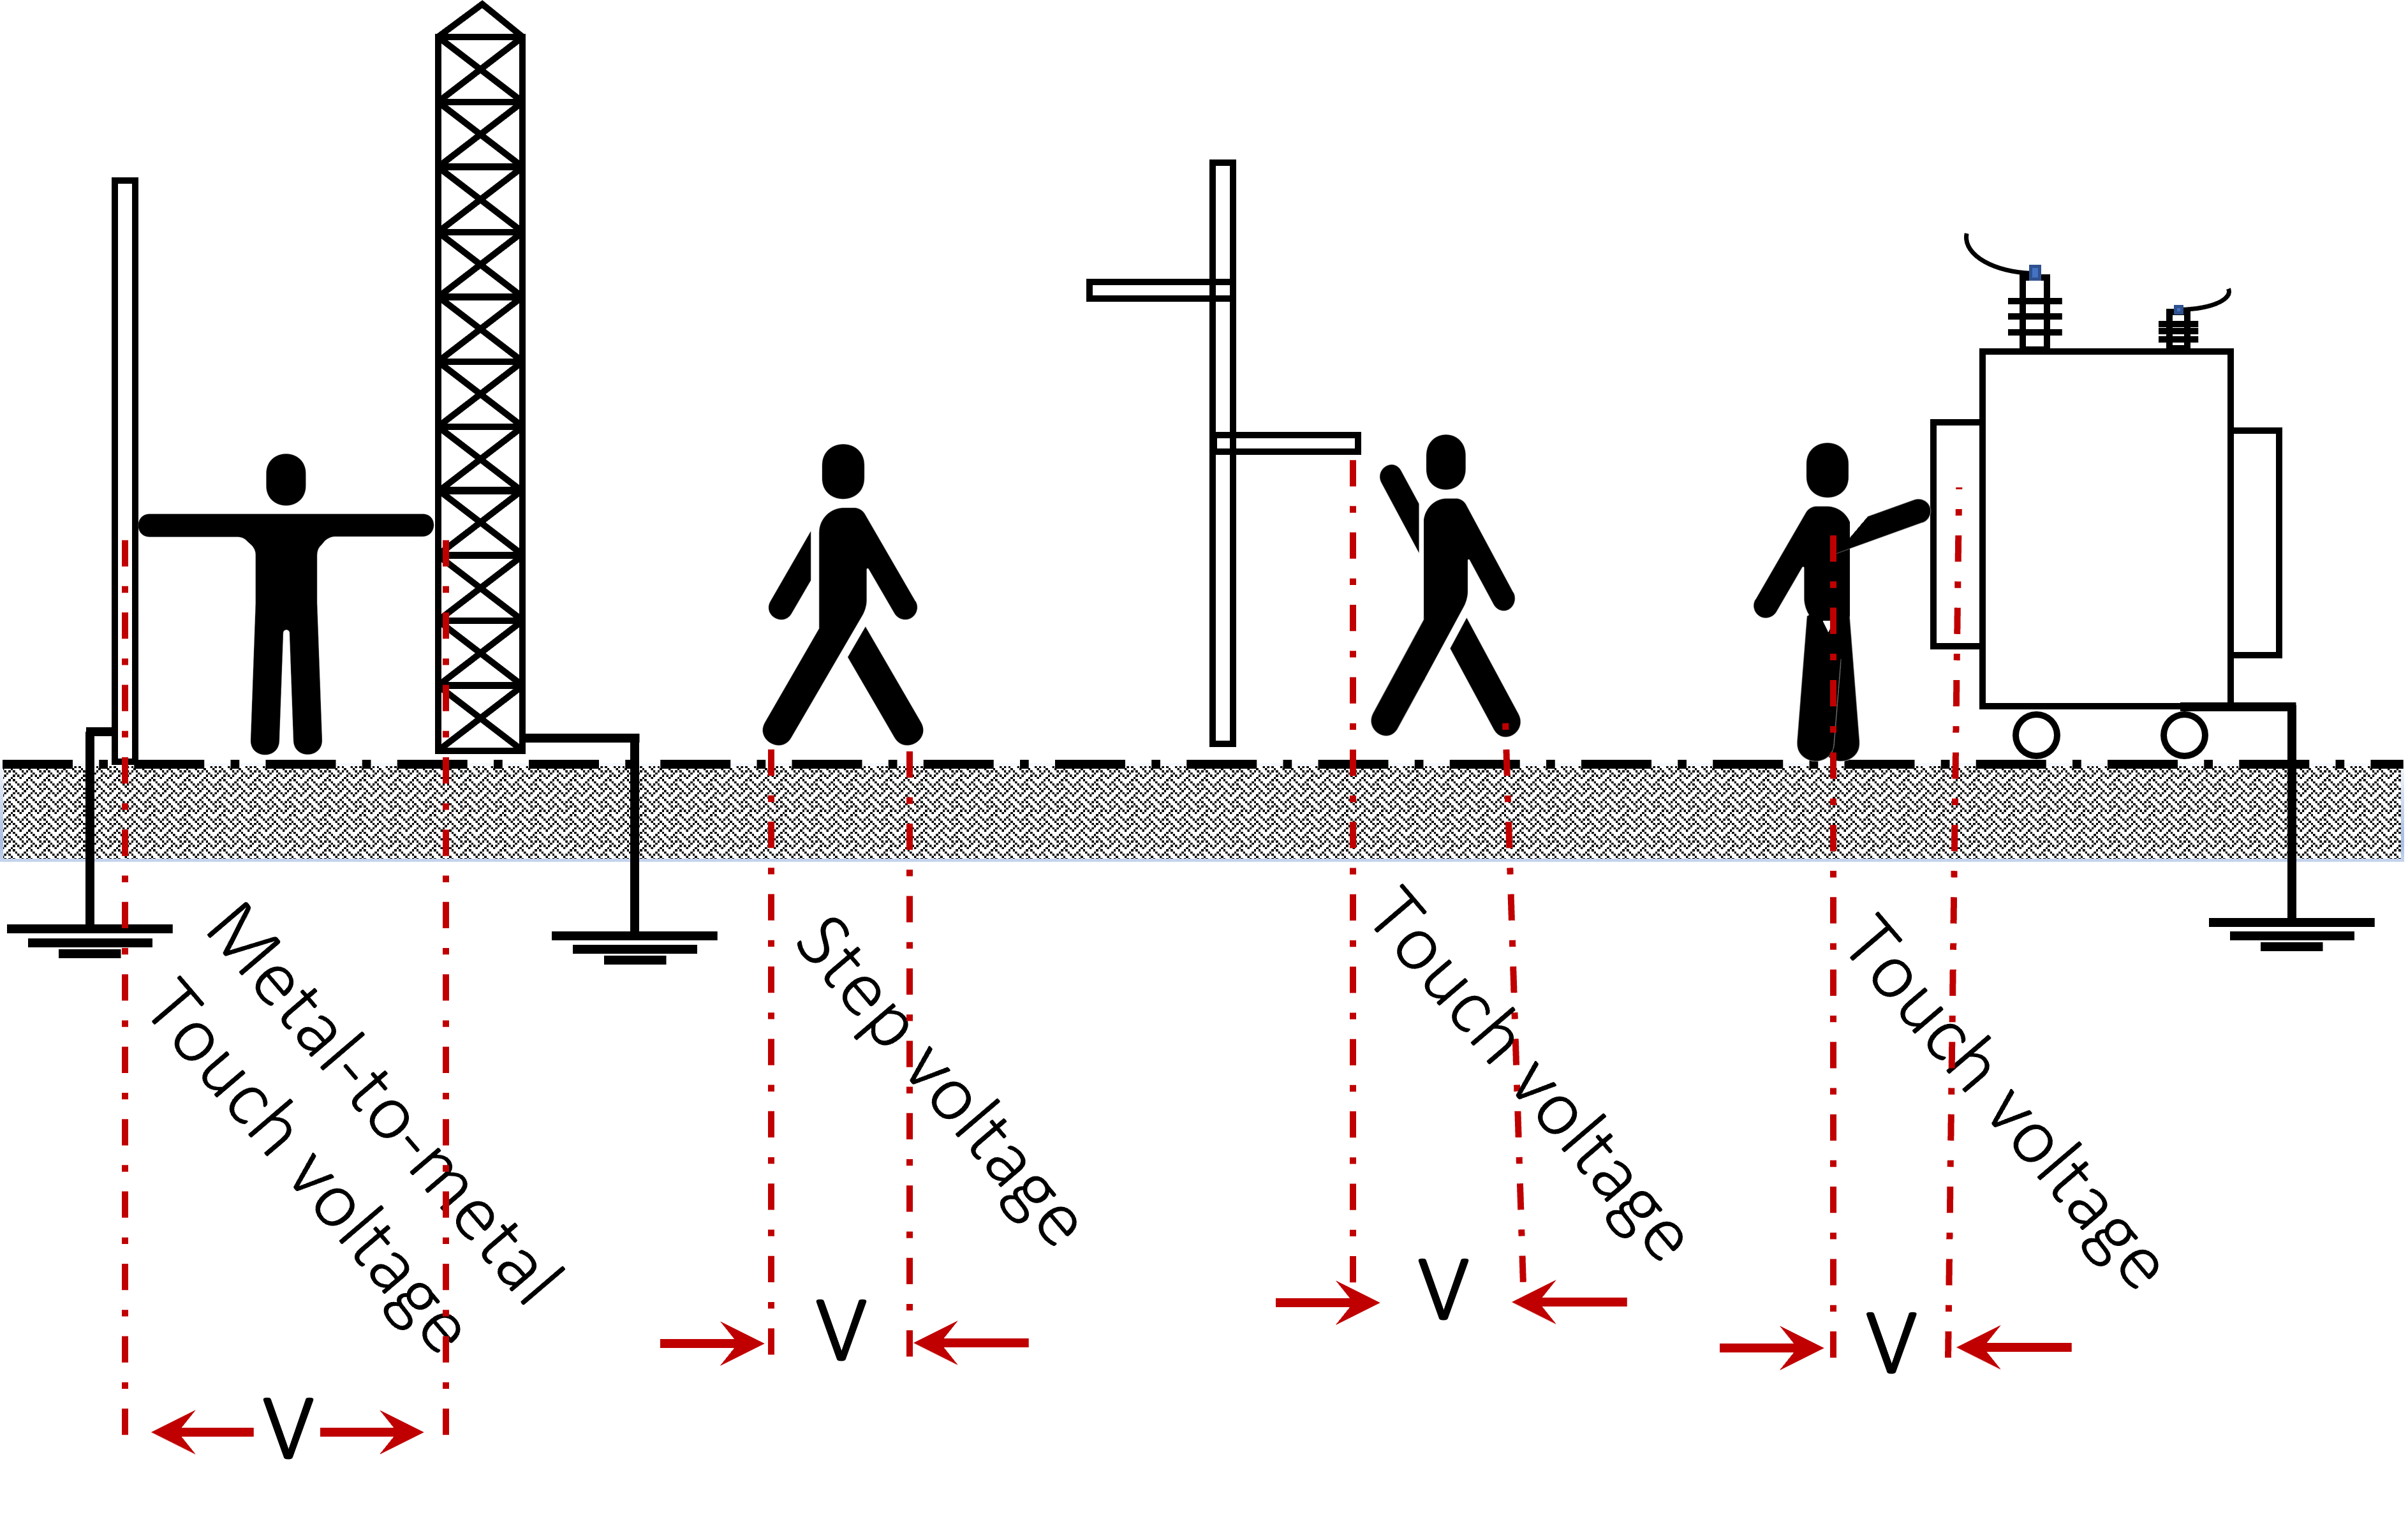 Representation of The Step and Touch Voltages